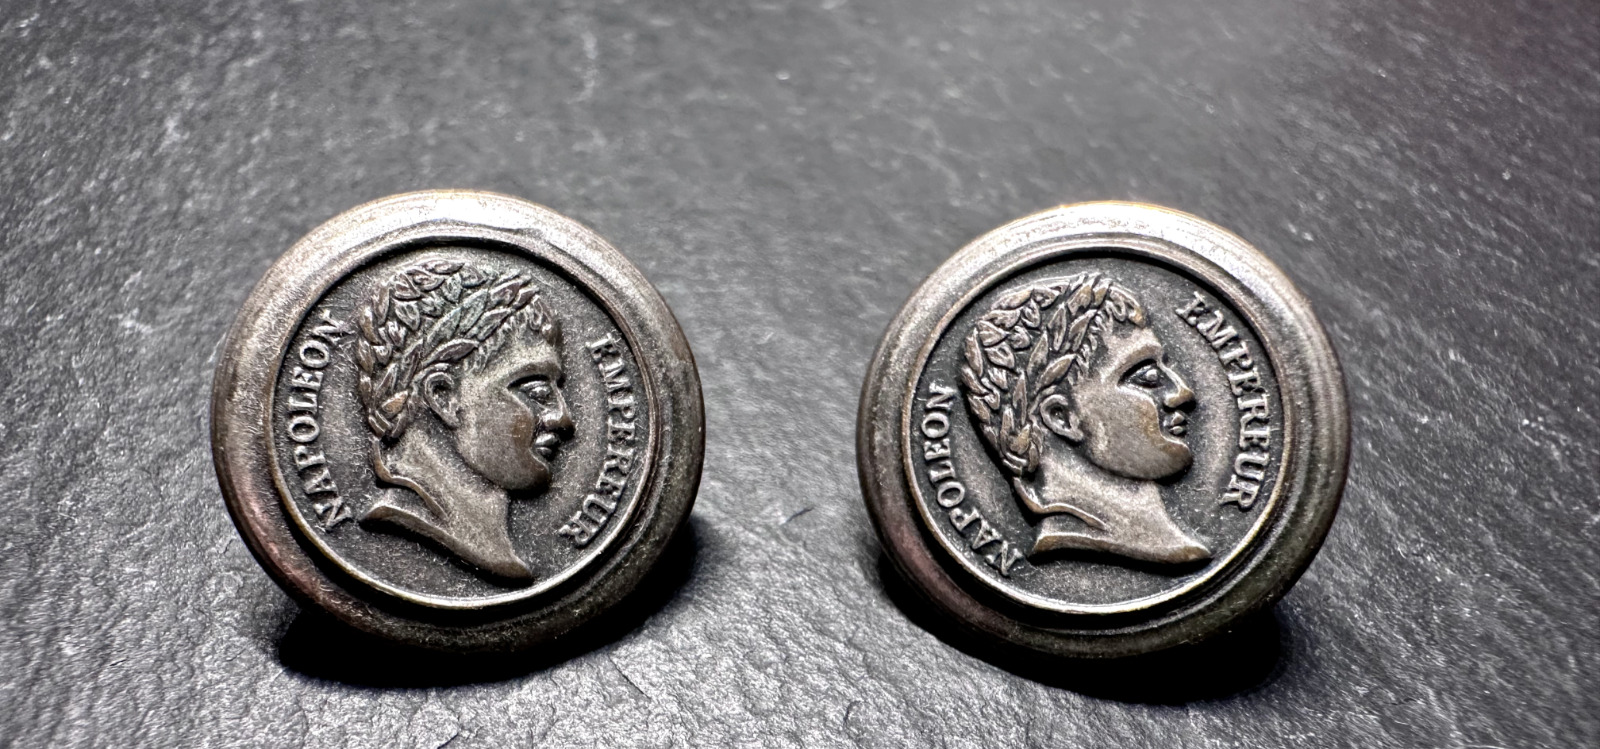 TWO VINTAGE NAPOLEAN EMPEREUR SILVER TONE ROUND MEDAL 19.3MM BUTTONS D402